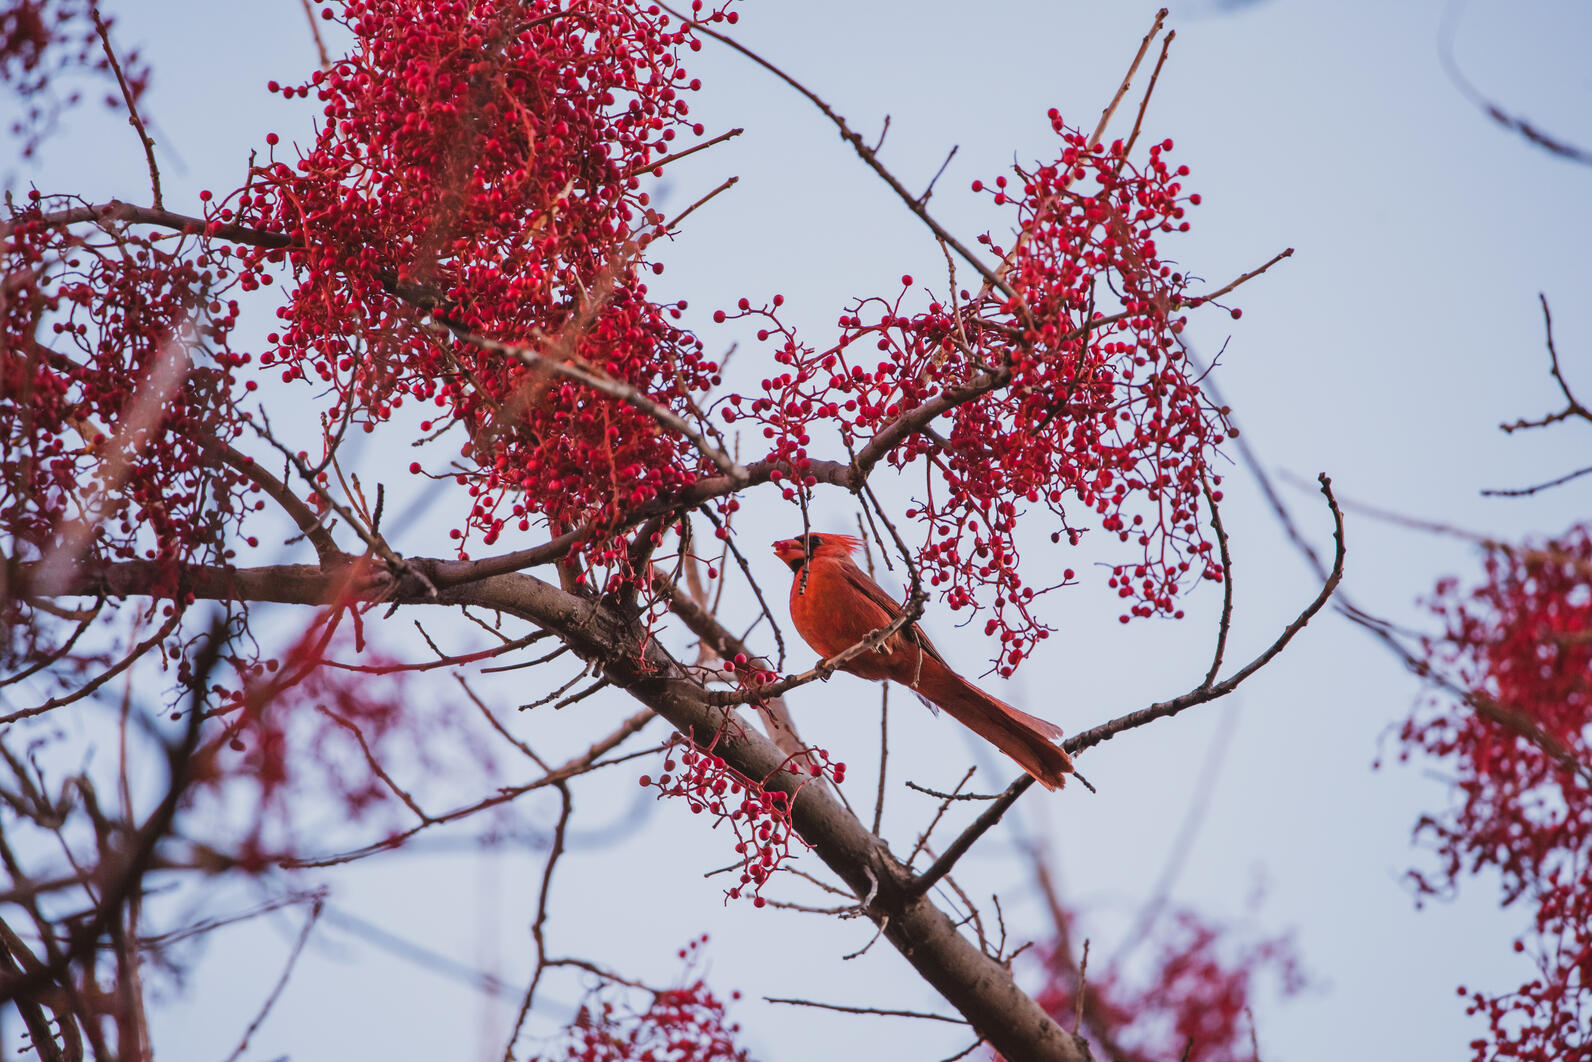 Northern Cardinal perrech on a tree branch